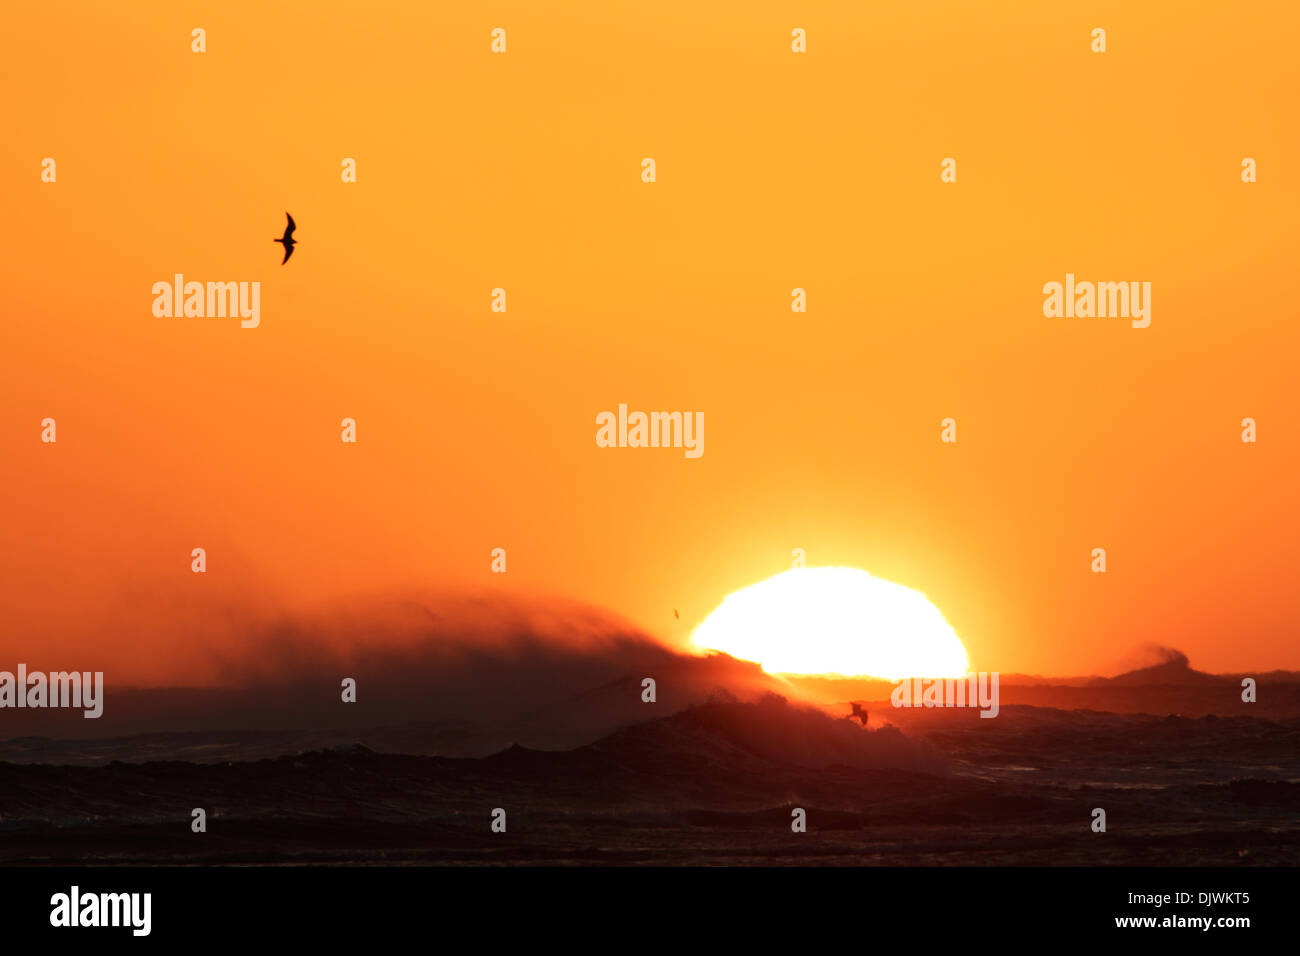 Sunrise over a turbulent sea with a white sun against a golden sky with seagulls flying around Stock Photo